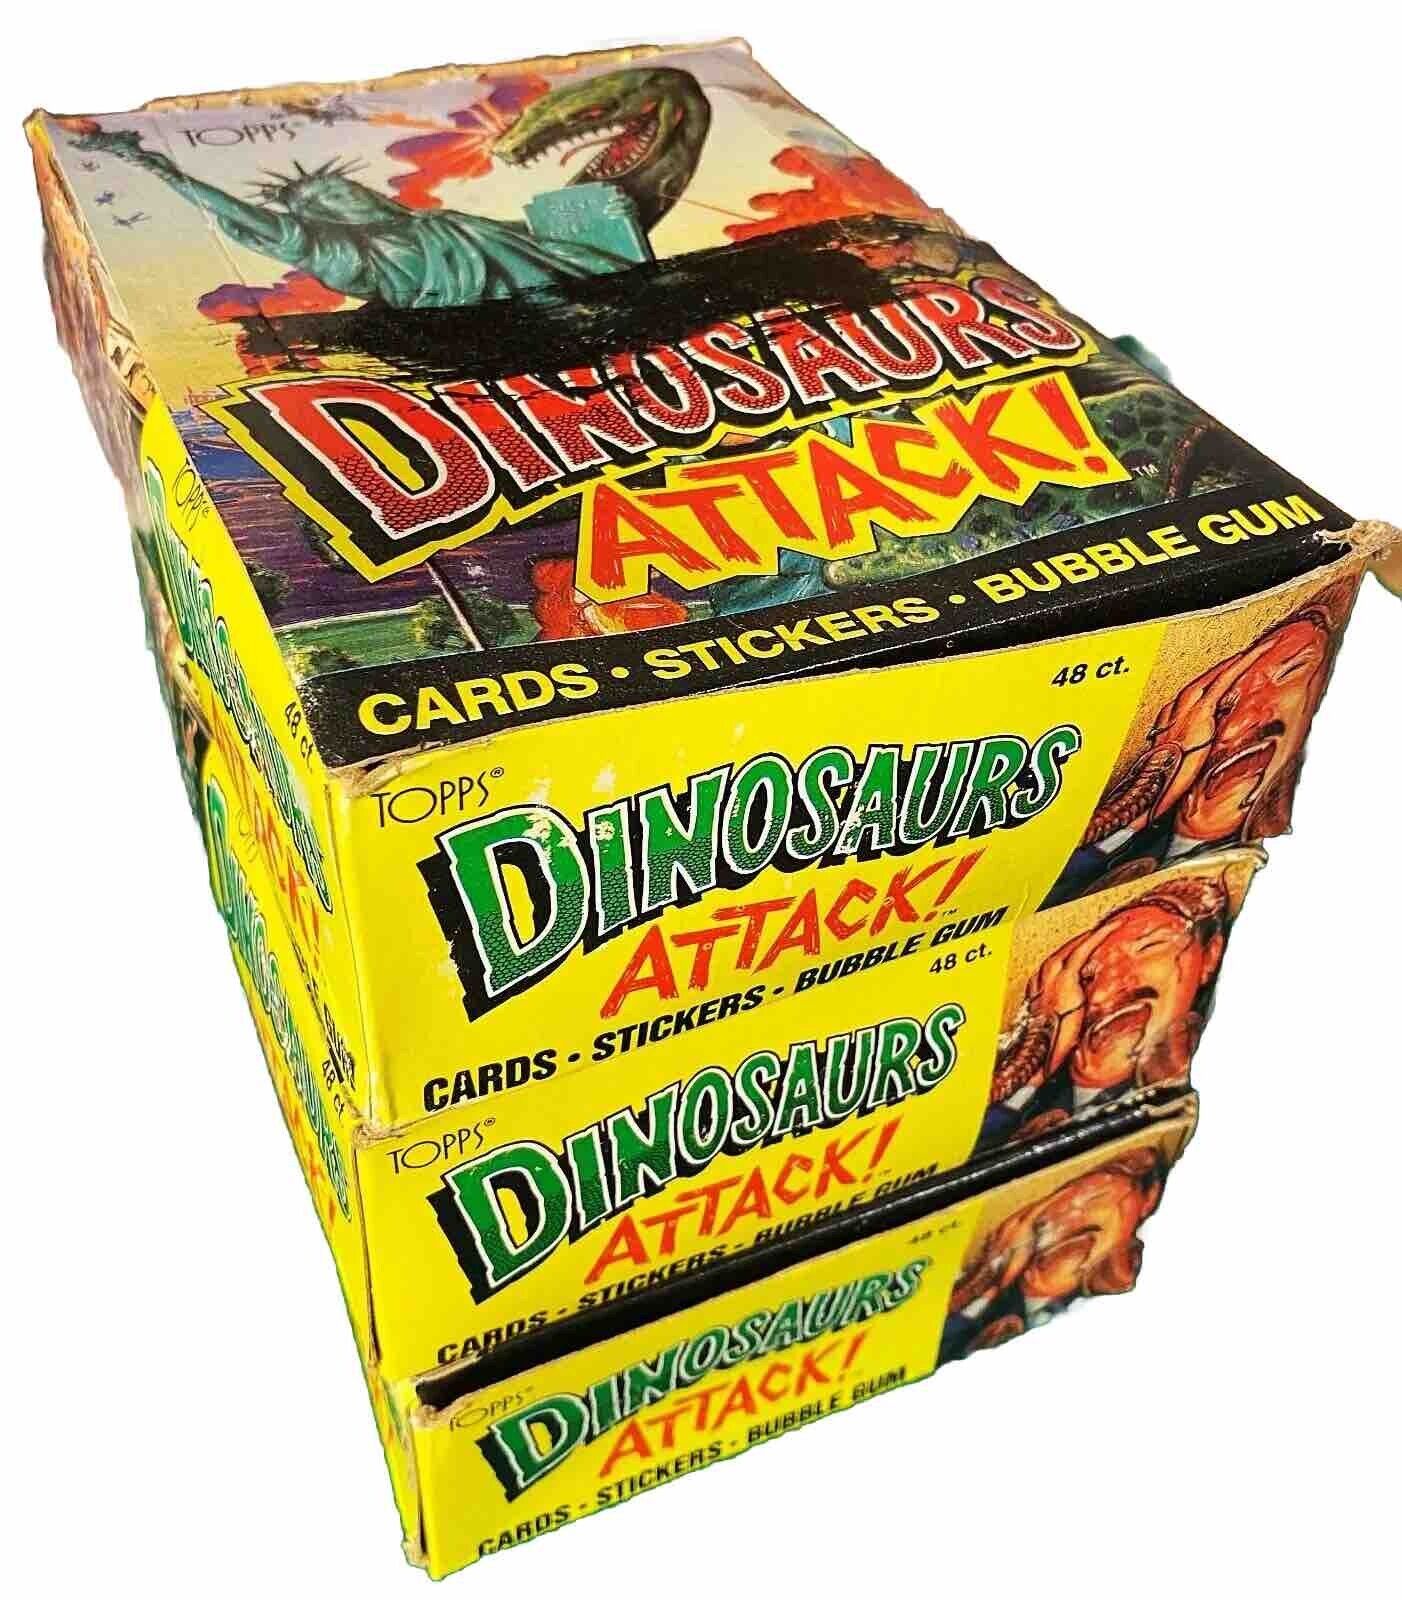 LOT OF 3 1988 TOPPS DINOSAURS ATTACK WAX BOXES 48 SEALED PACKS In Each Box